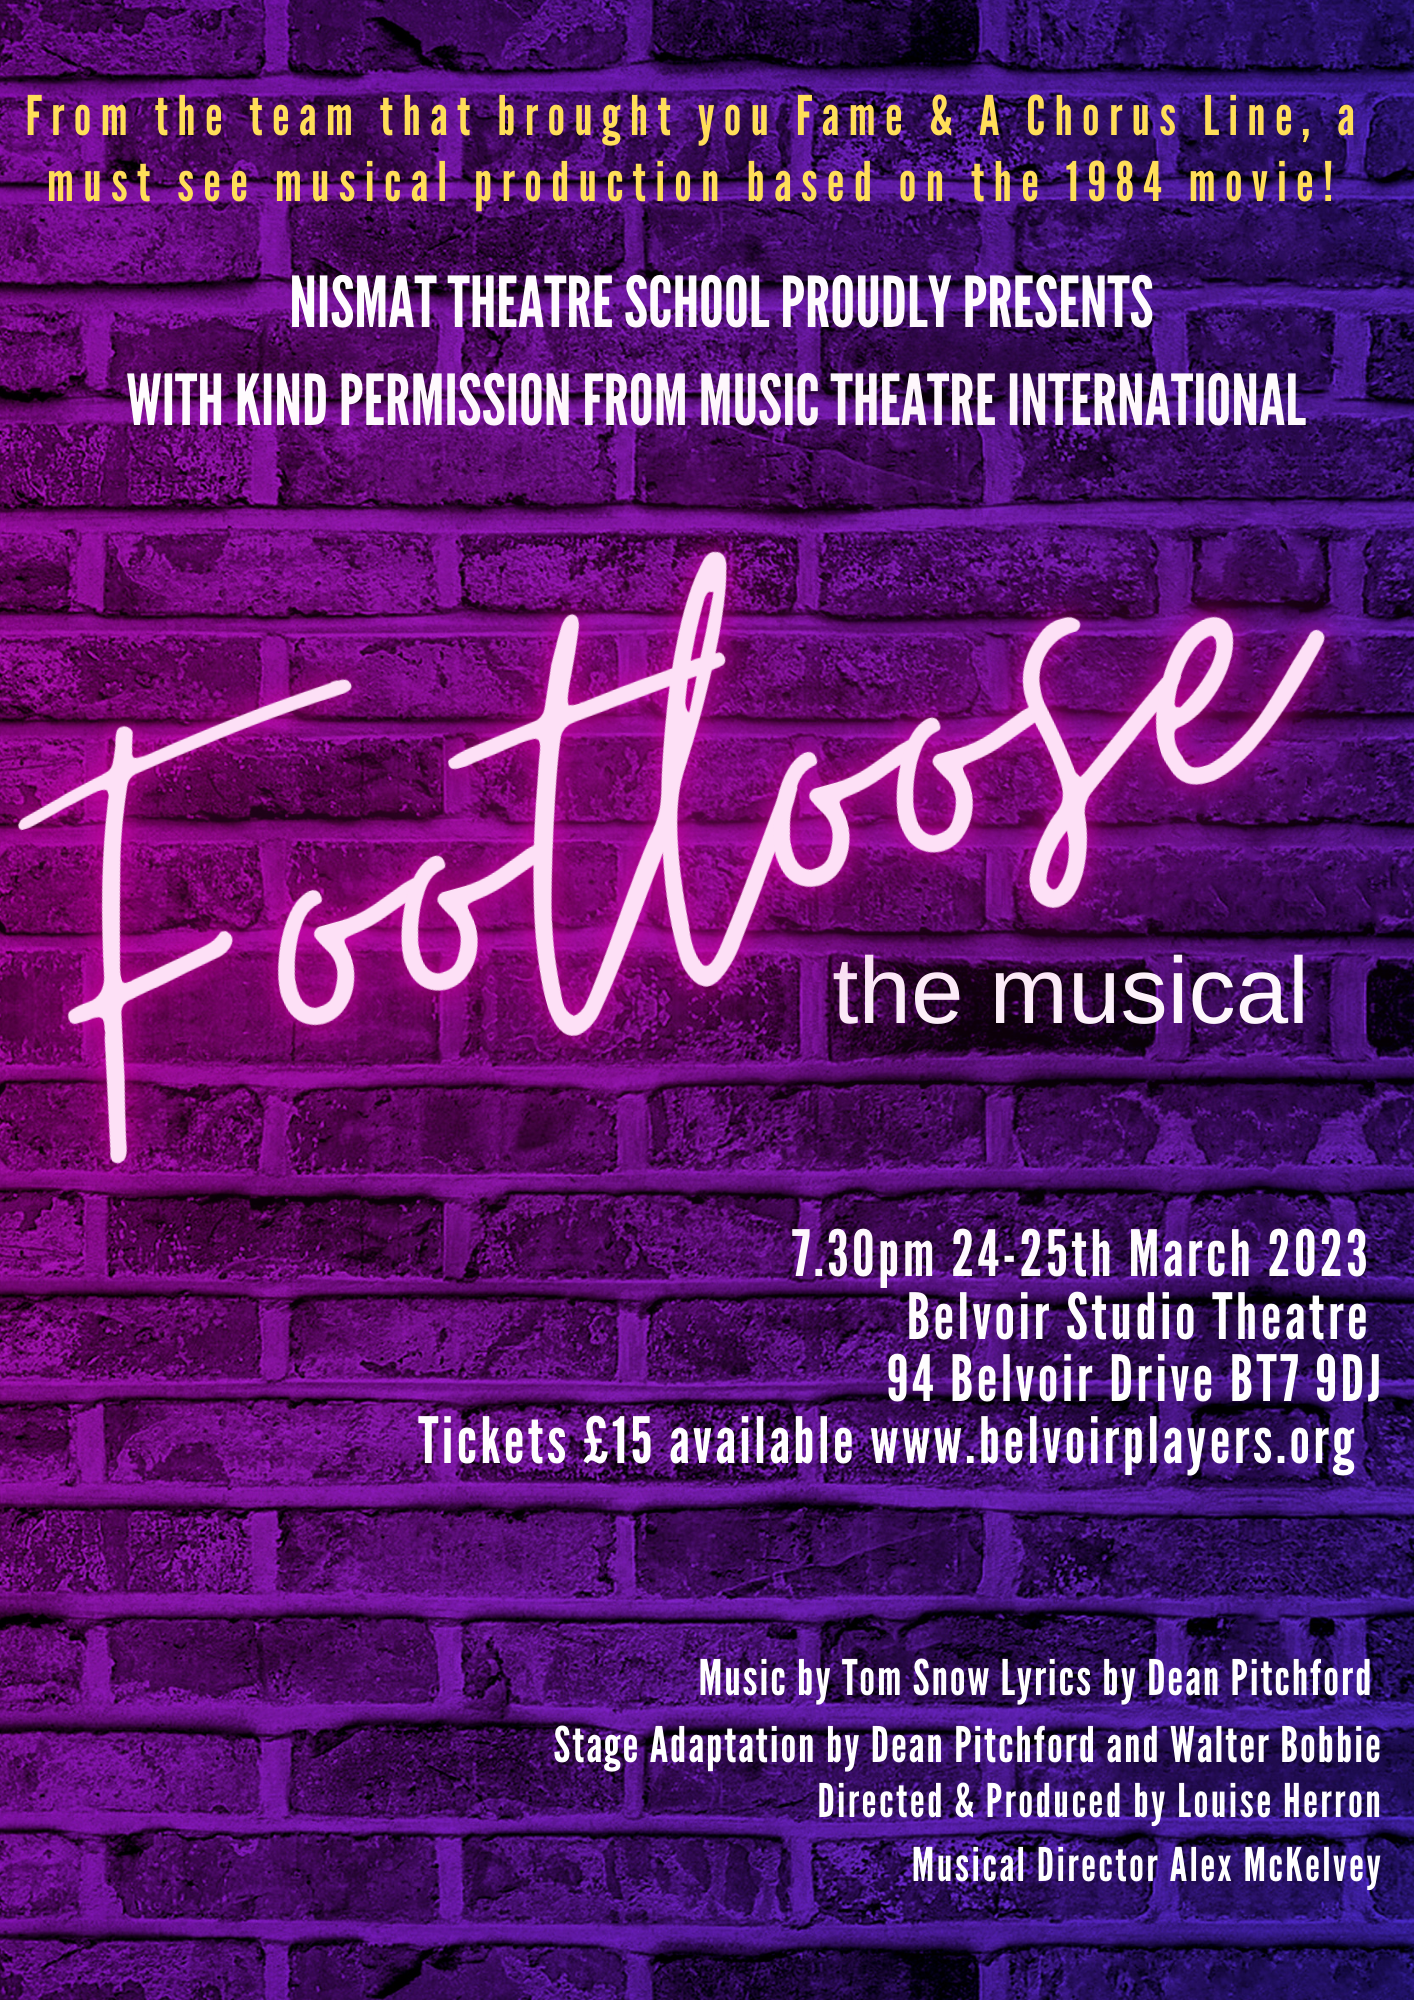 Footloose poster with logo and text